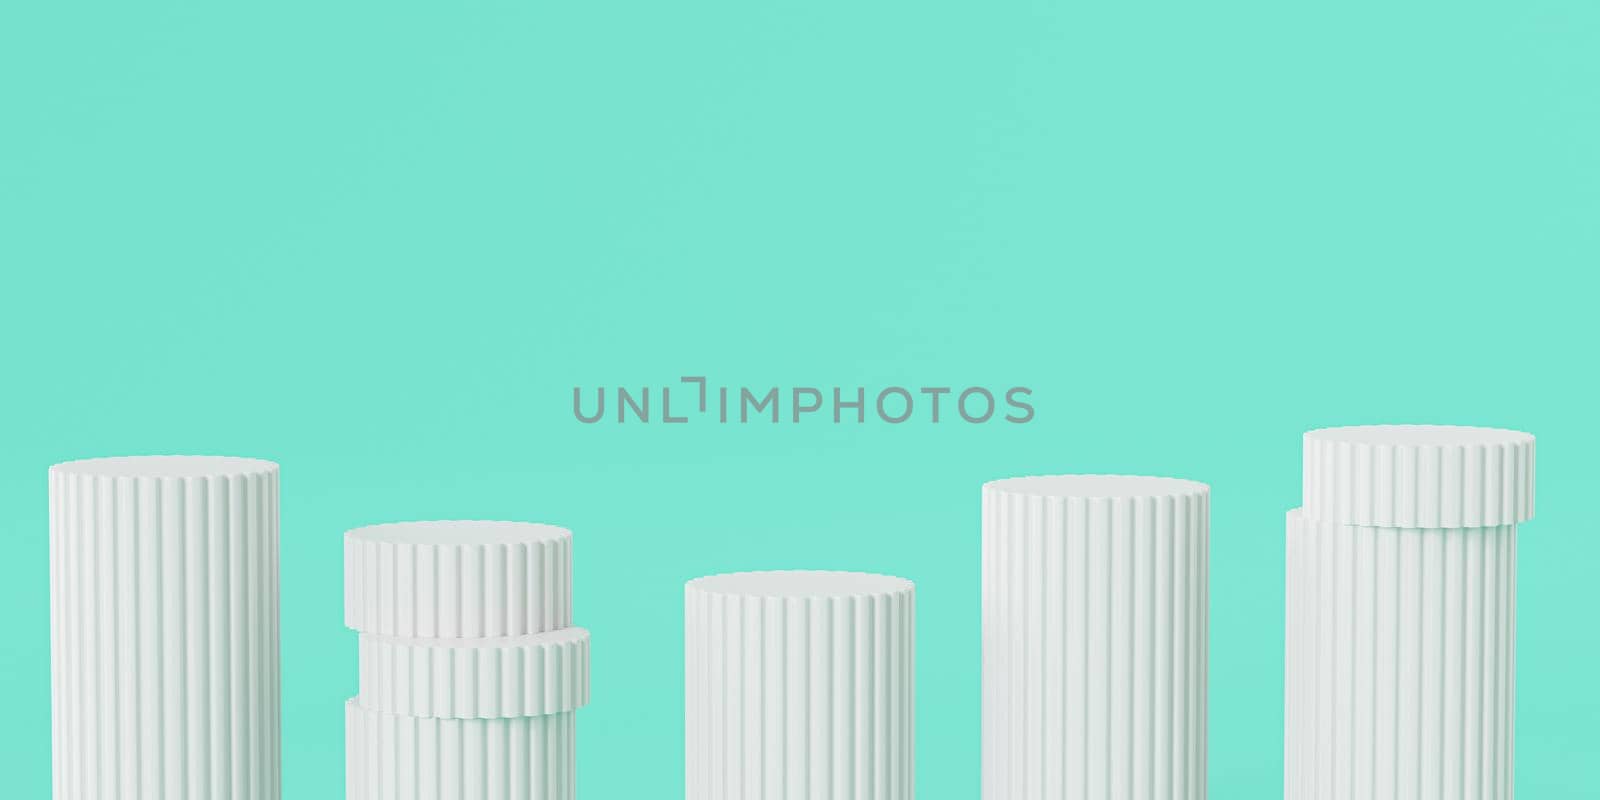 White pillar podiums or pedestals for products or advertising, on turquoise background, minimal 3d illustration render